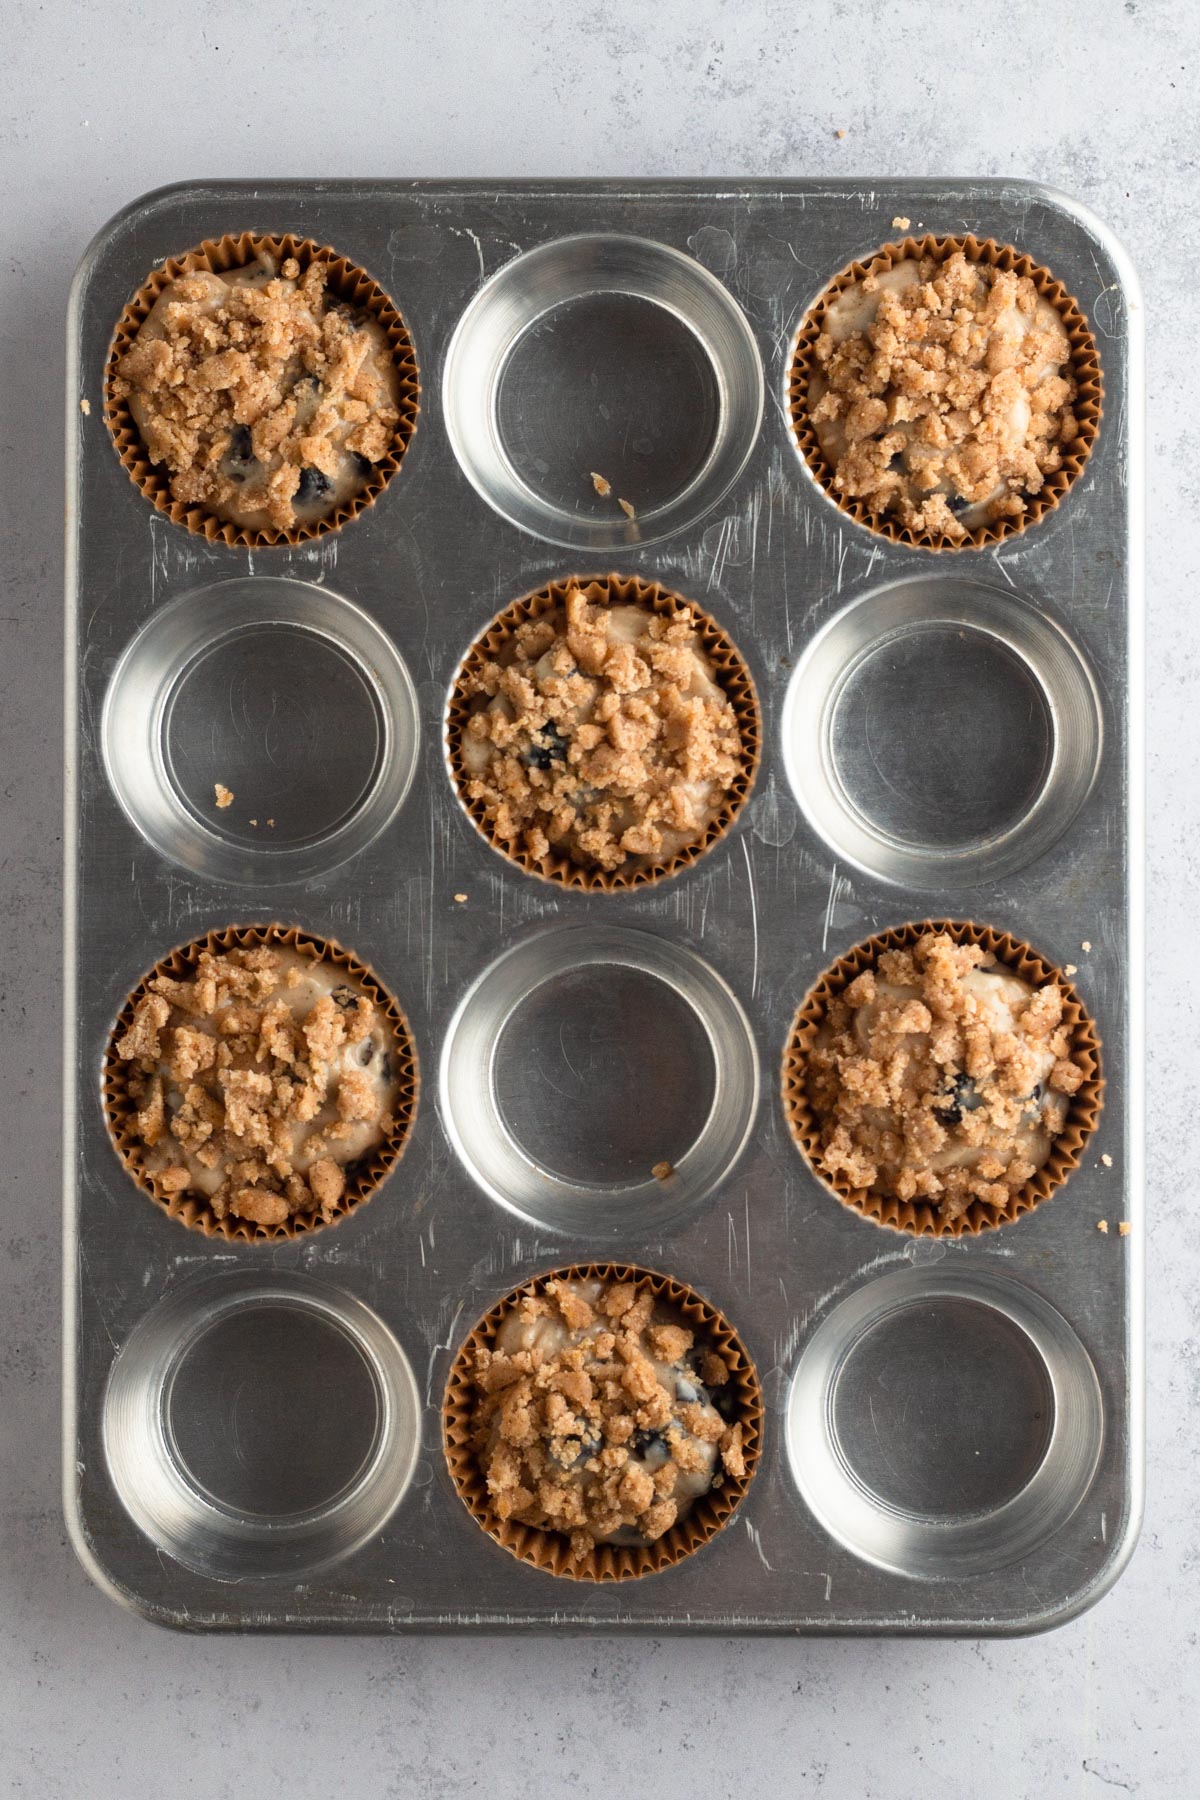 Muffin batter topped with streusel in brown paper liners in a metal muffin pan.